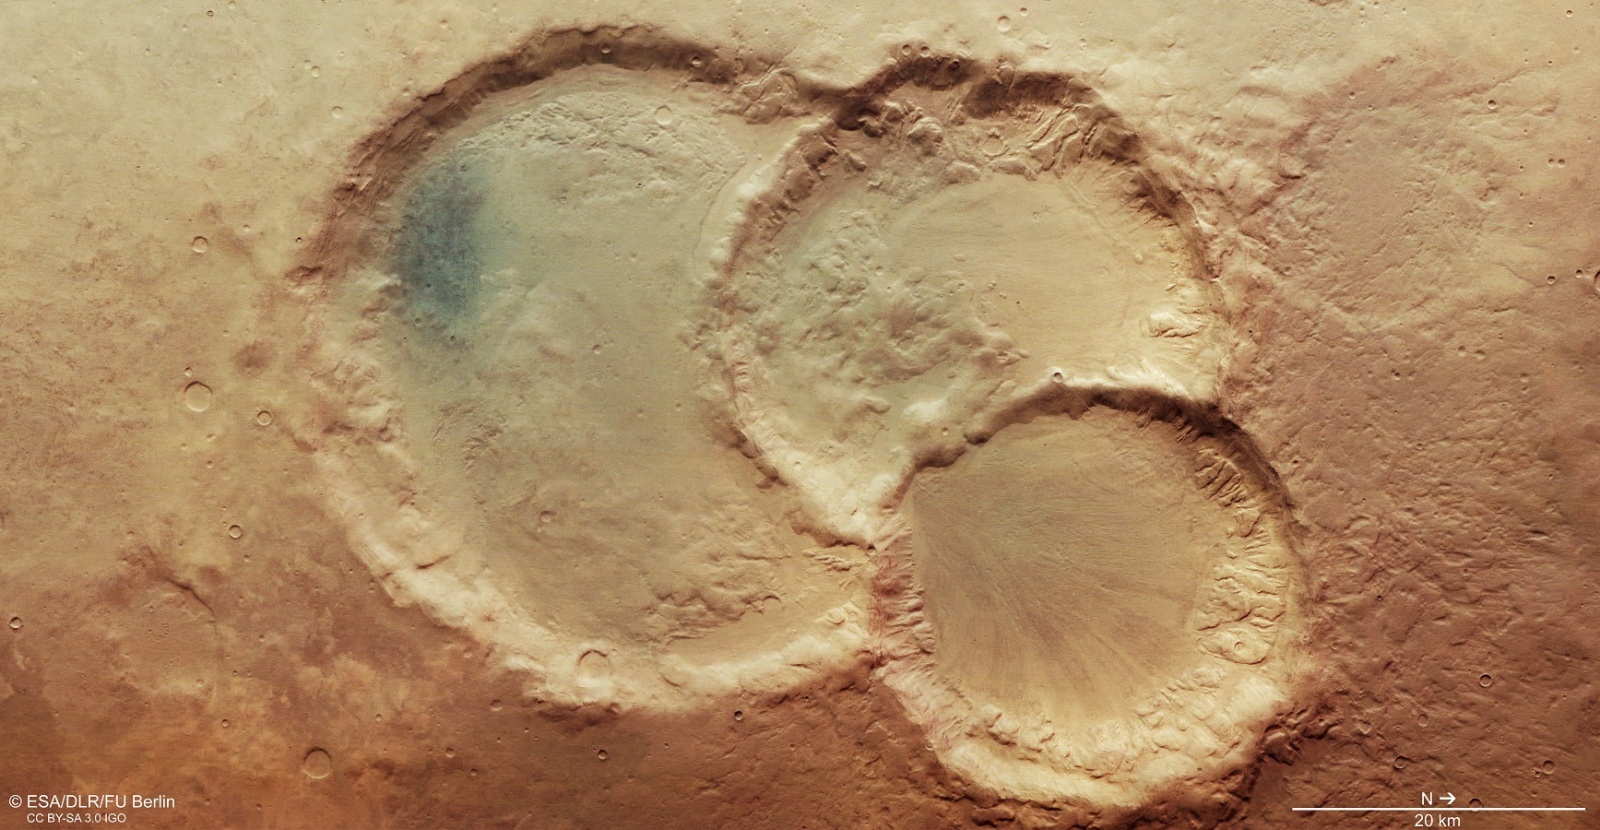 Mars_Express_spies_an_ancient_triple_crater_on_Mars__.jpg